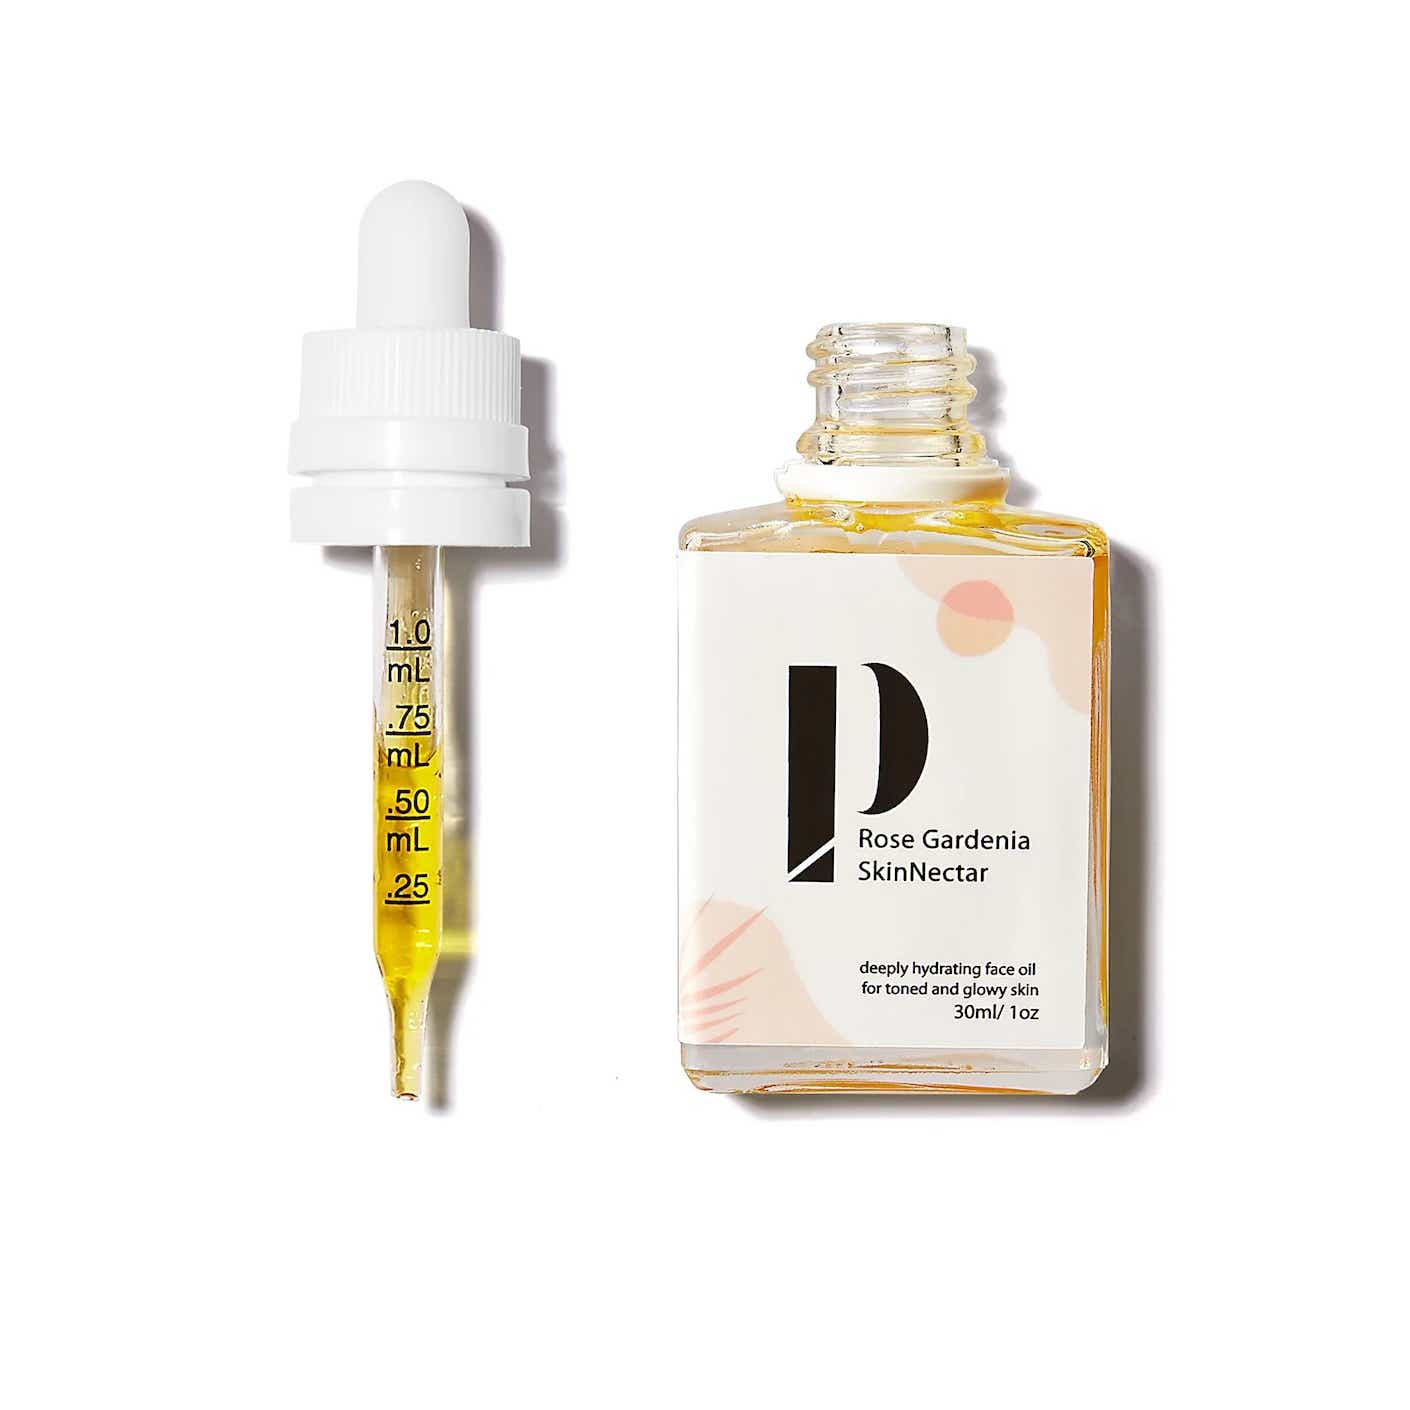 A square glass bottle of serum is pictured next to a dropper full of serum.